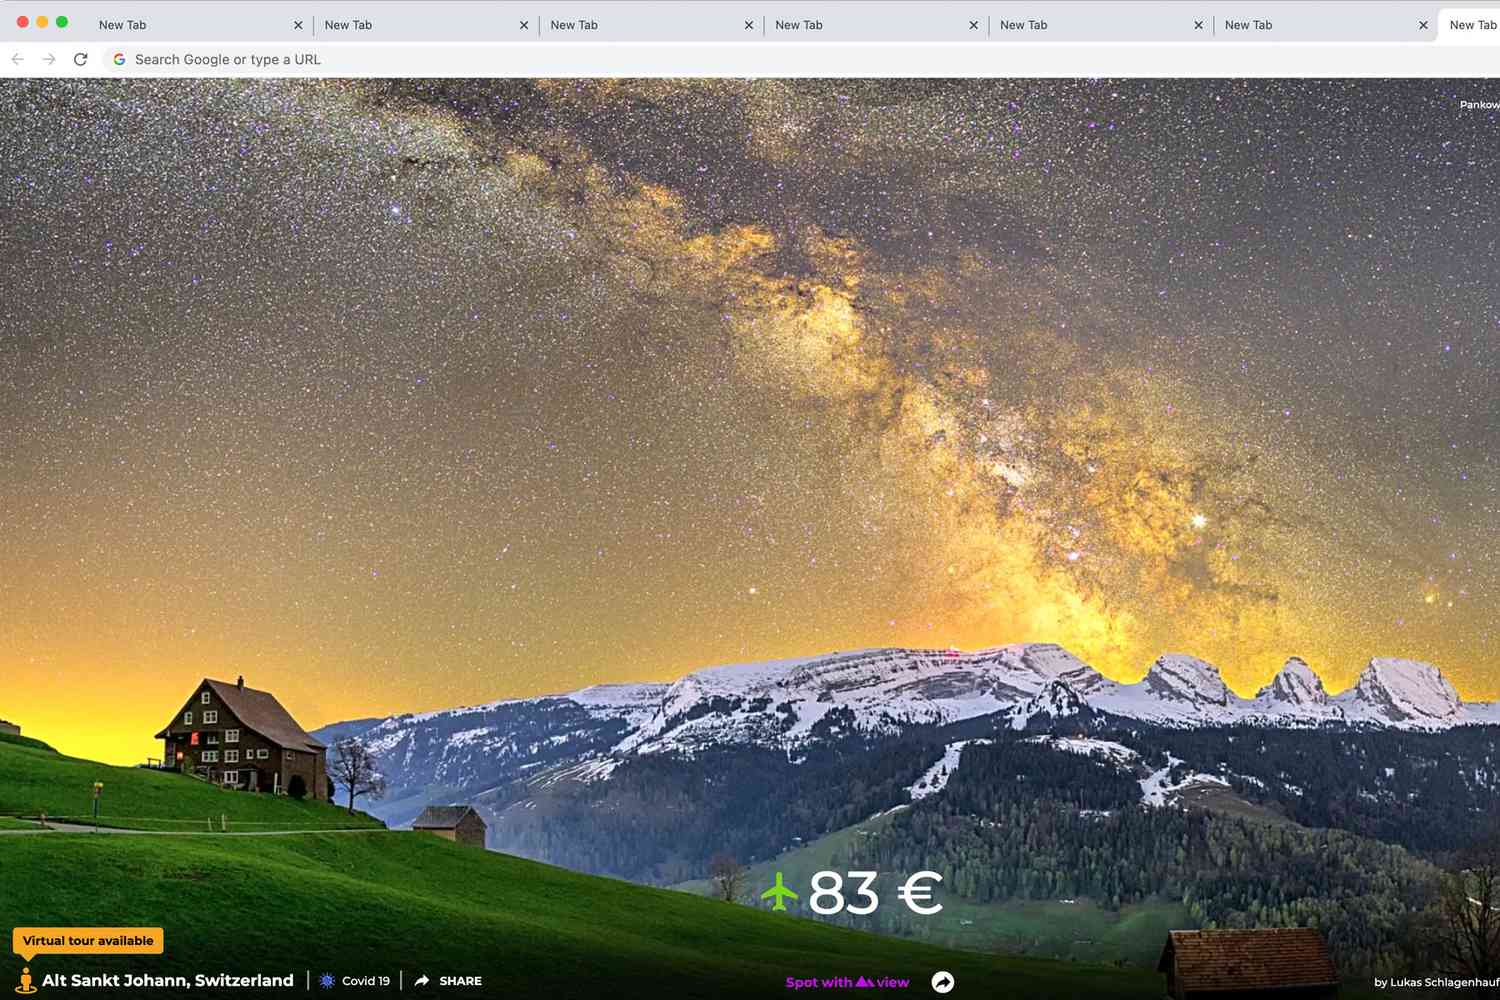 This Browser Extension Lets You Take a Virtual Vacation Every Time You Open a Tab